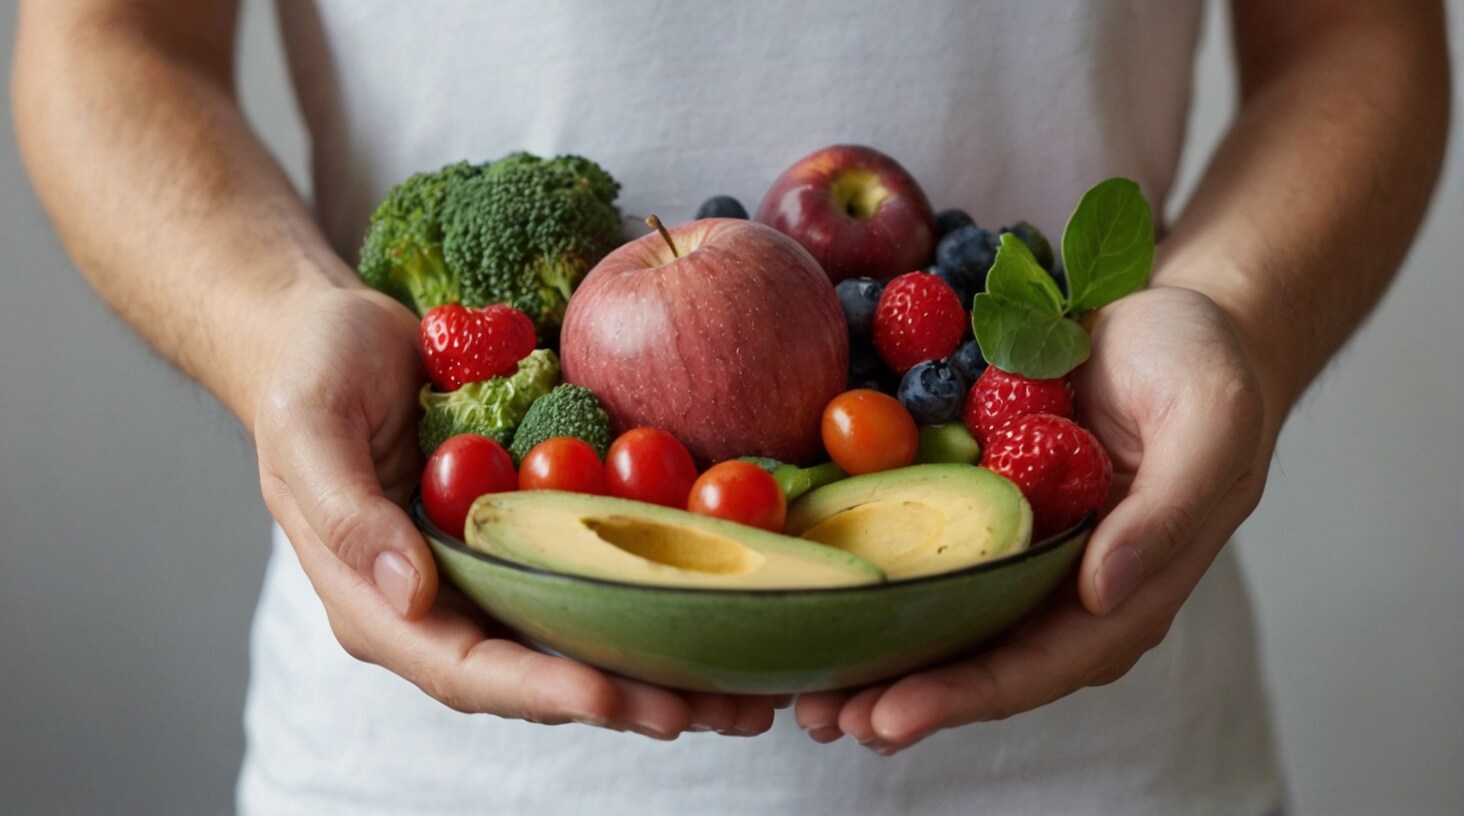 A plate filled with colorful fruits, vegetables, and grains, symbolizing diet and nutrition for gut health.